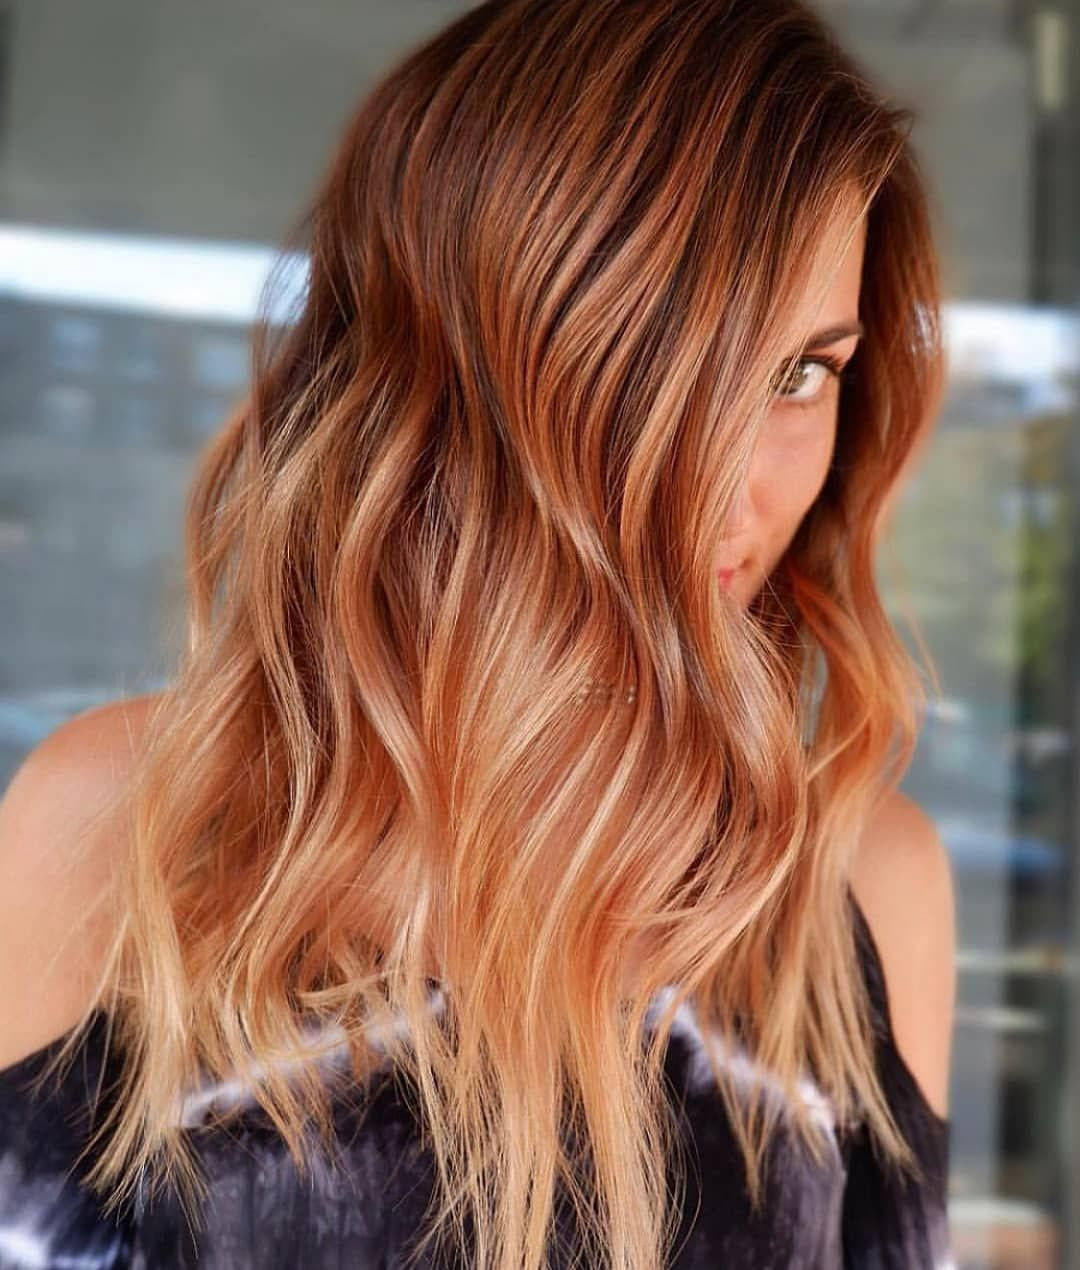 10 Cute Fun Red Hair Color Ideas 26 stylish and fun hair dye ideas to try in 2019 hair colors for 2024